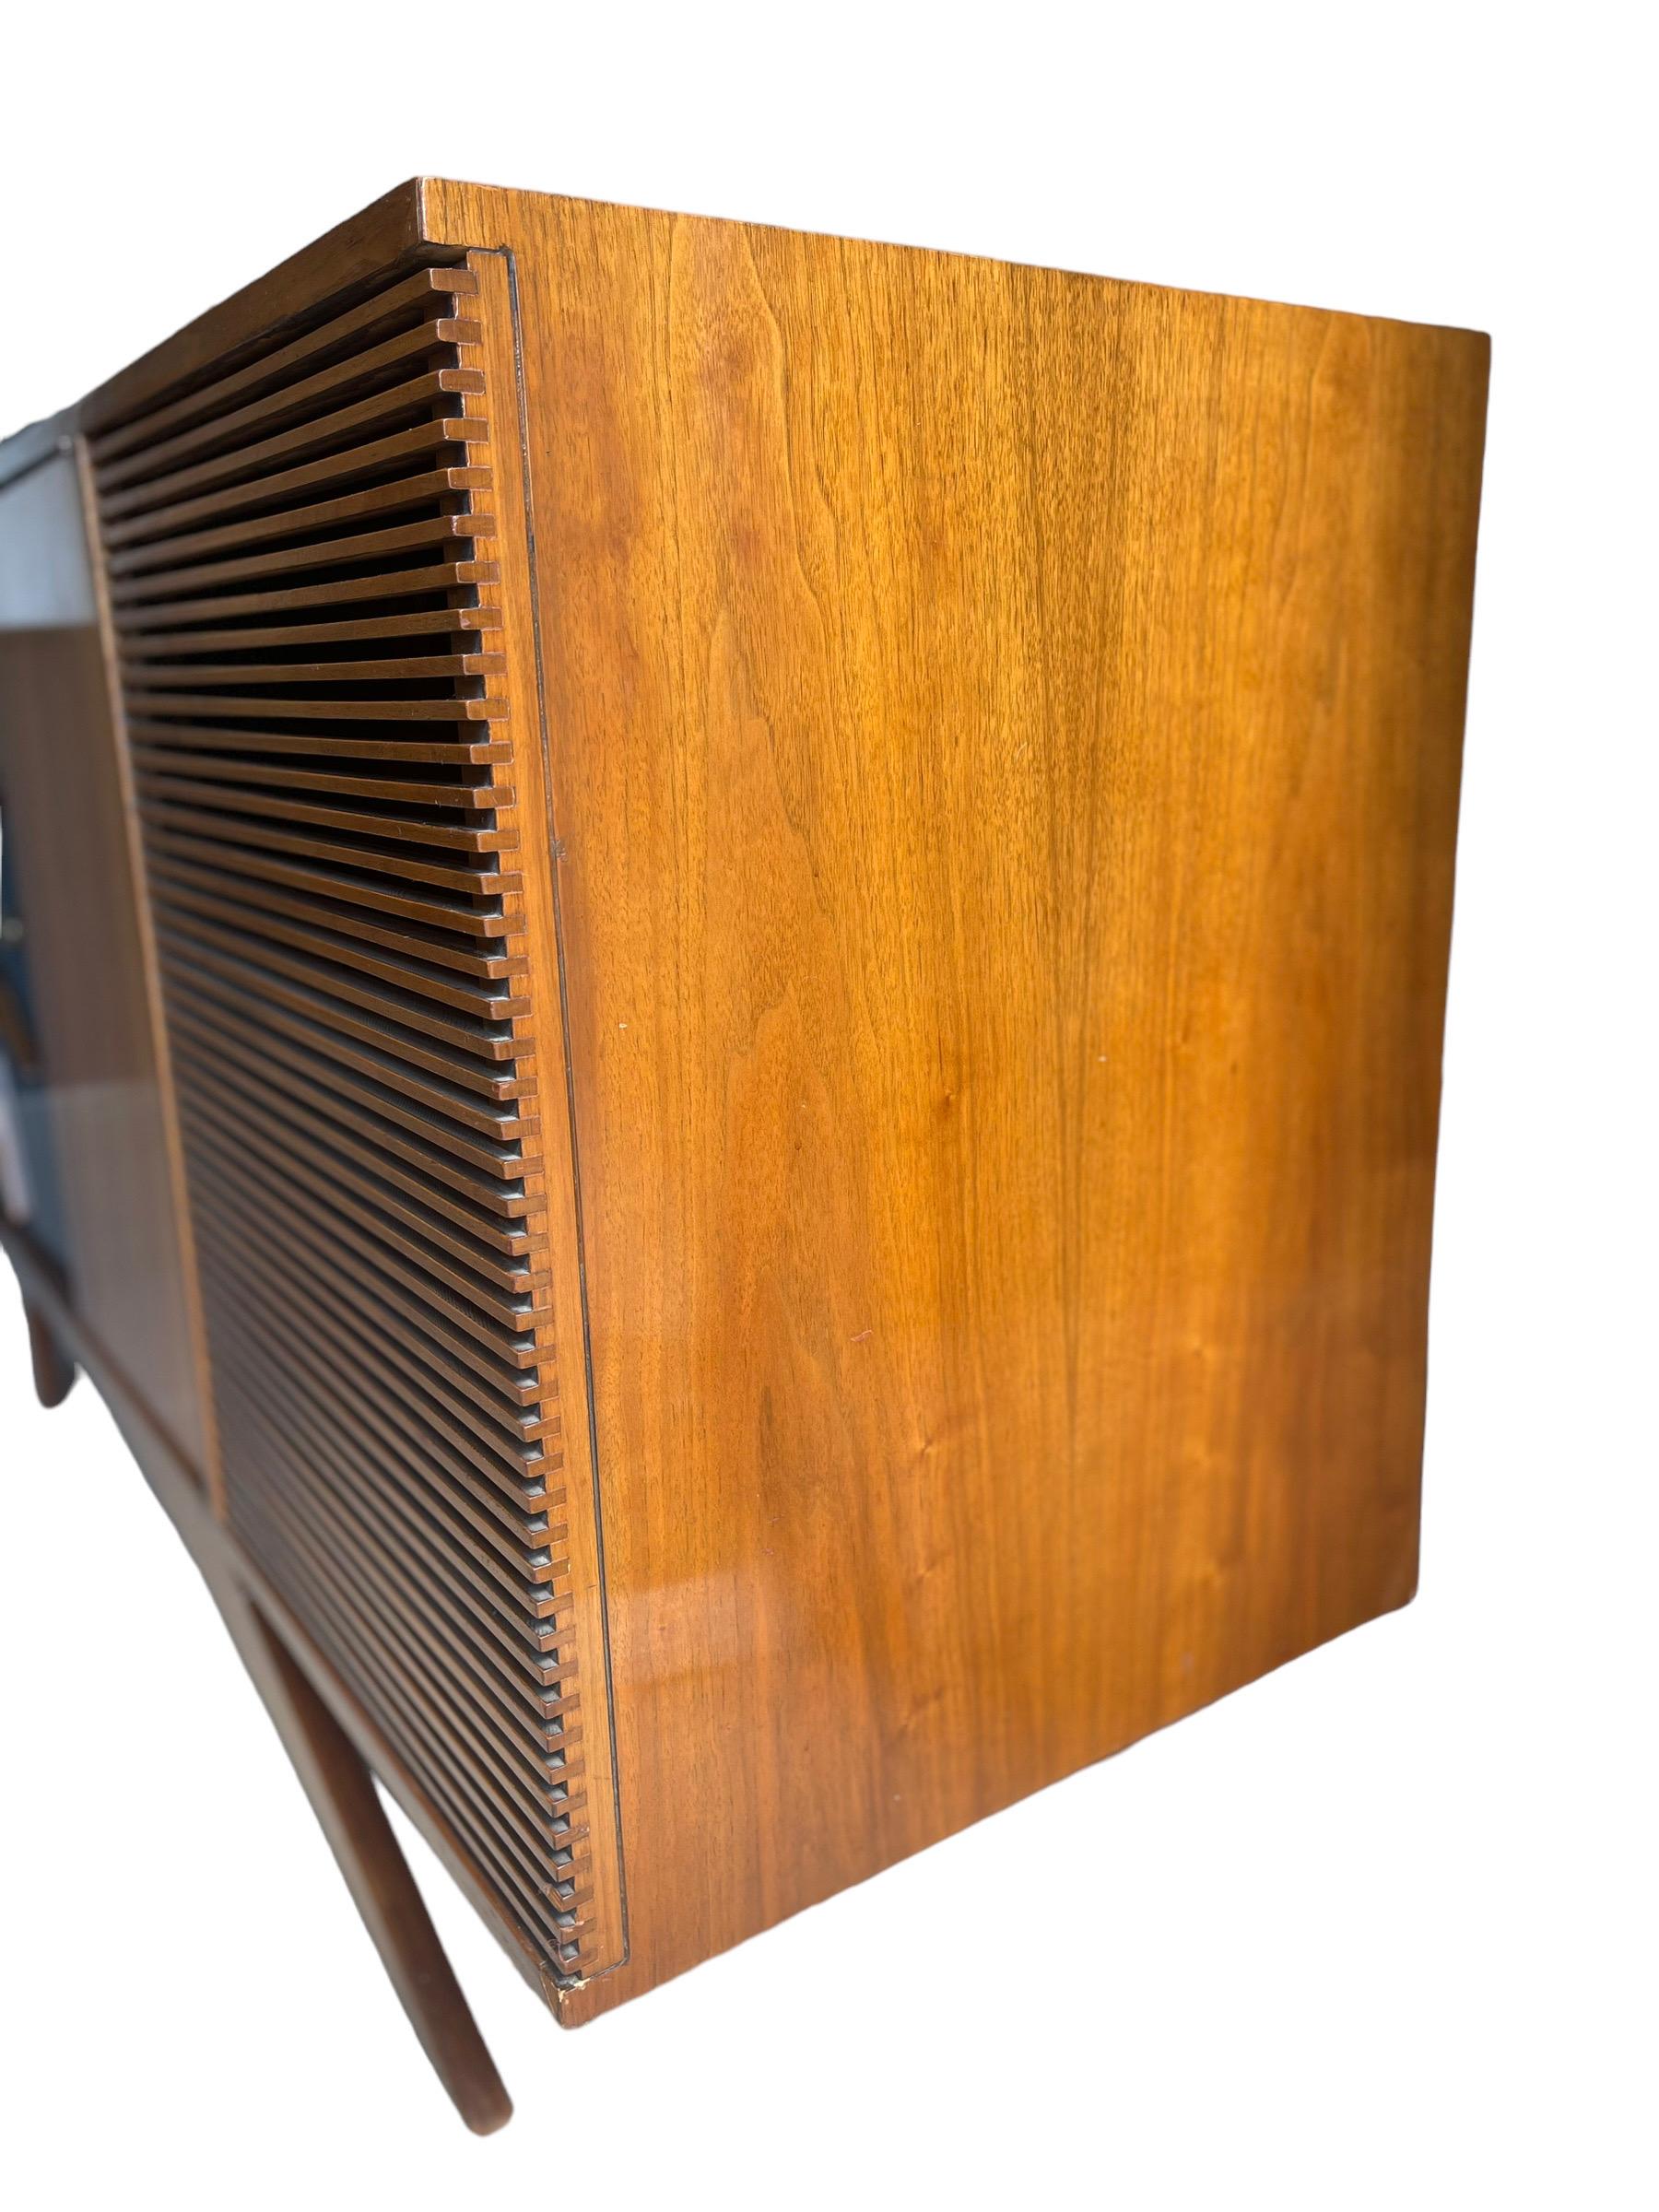 Rare Sculptural Credenza / Stereo Cabinet in Walnut in Manner of Vladimir Kagan For Sale 5